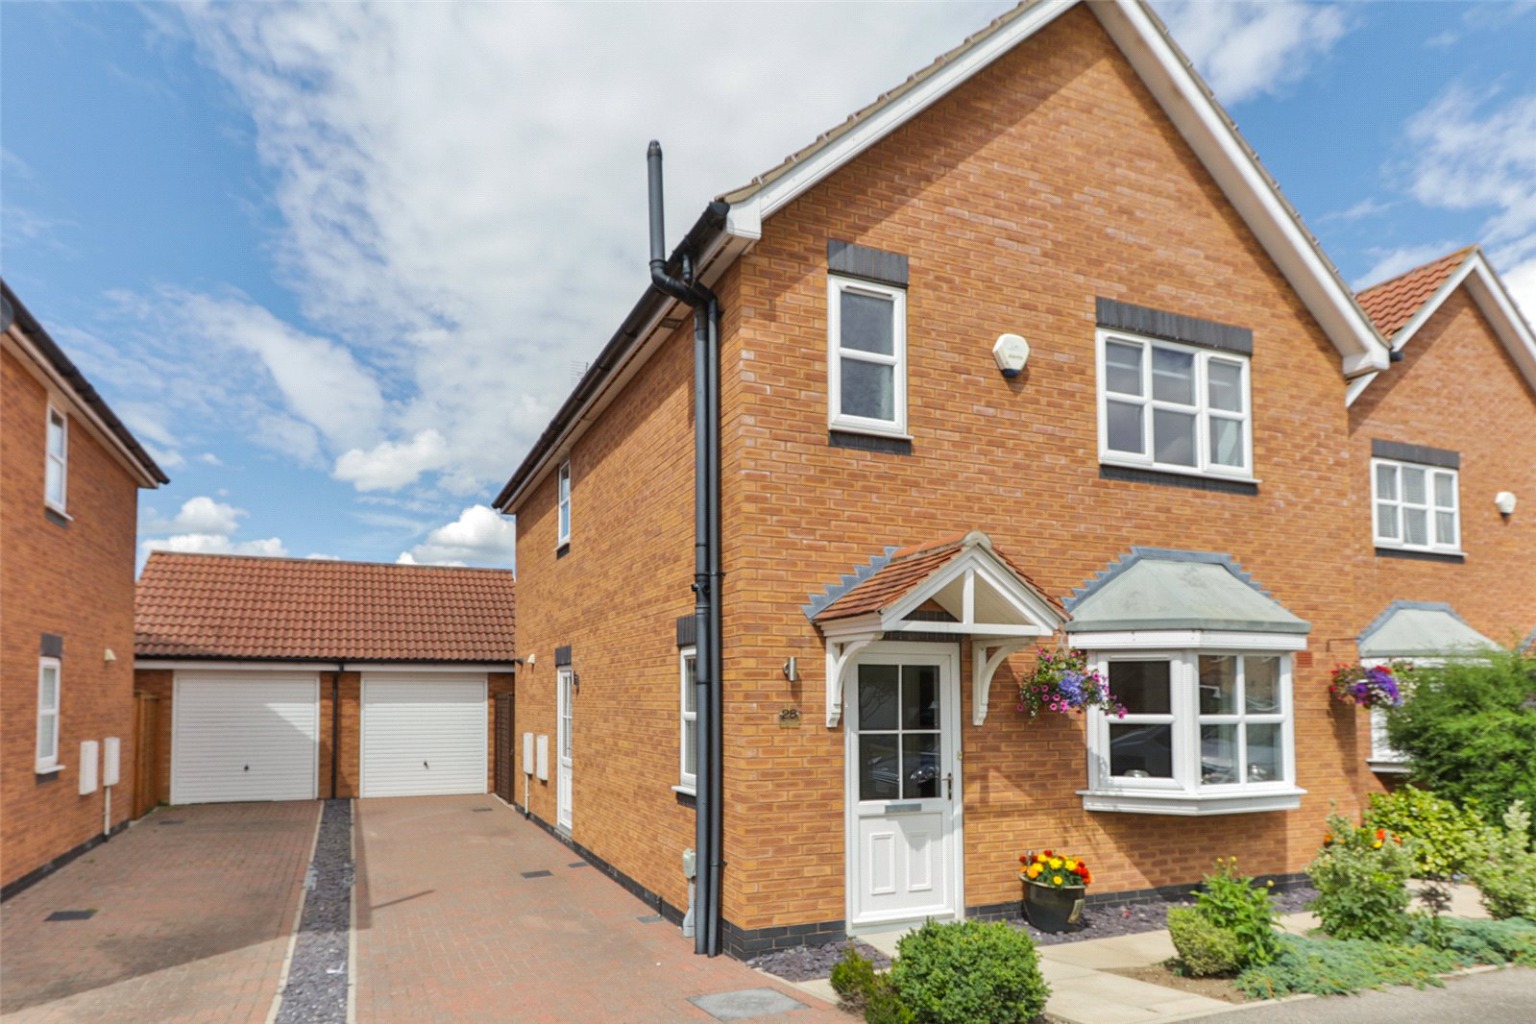 3 bed detached house for sale - Property Image 1